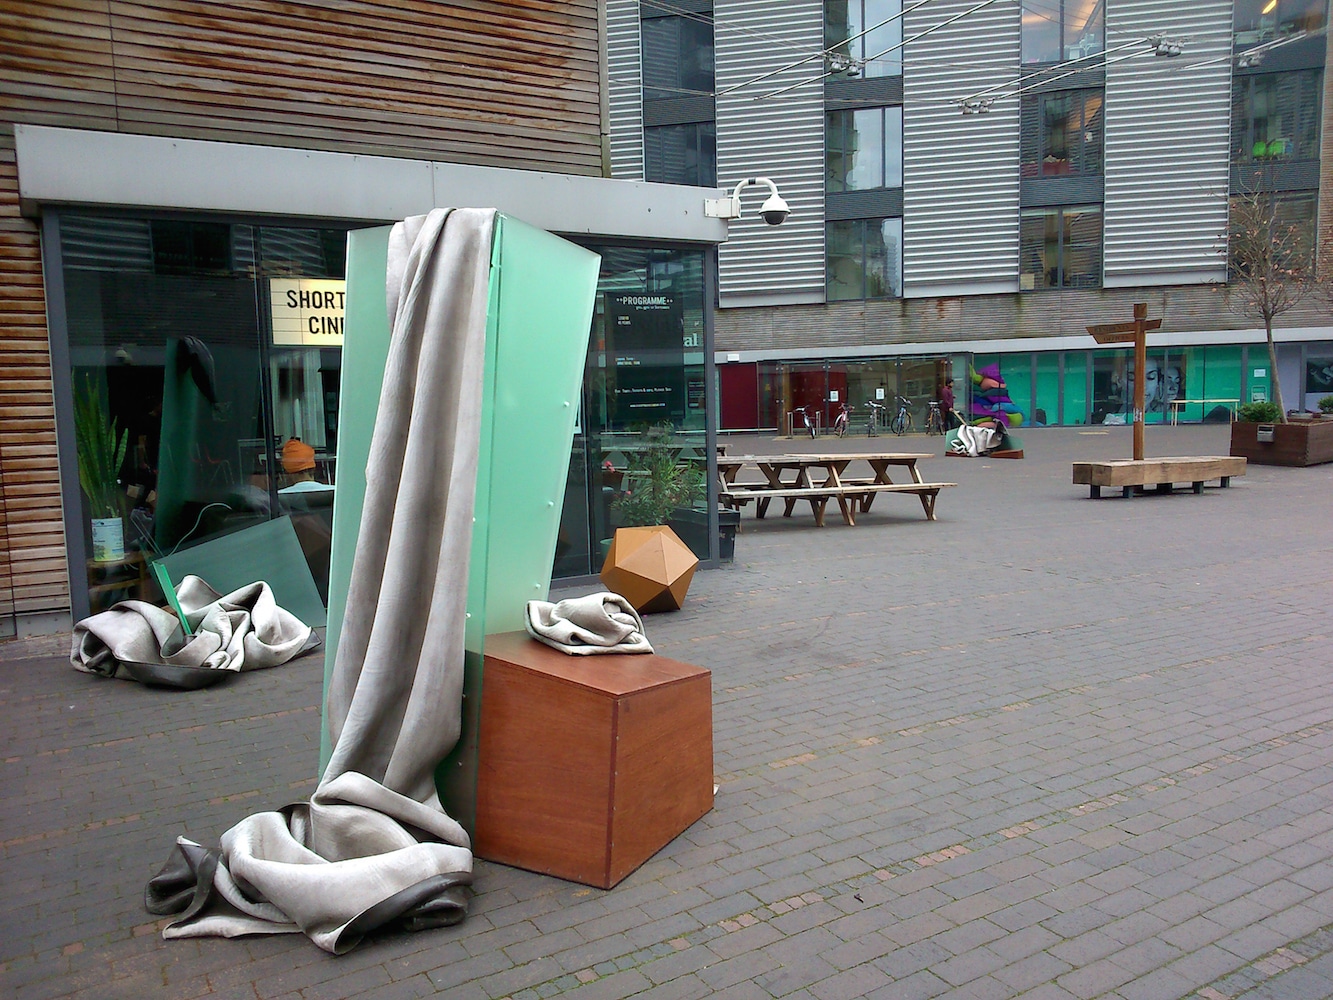 Sculpture by Frances Richardson for SCULPTURE AT Bermondsey Square, London. Made from draped concrete canvas.